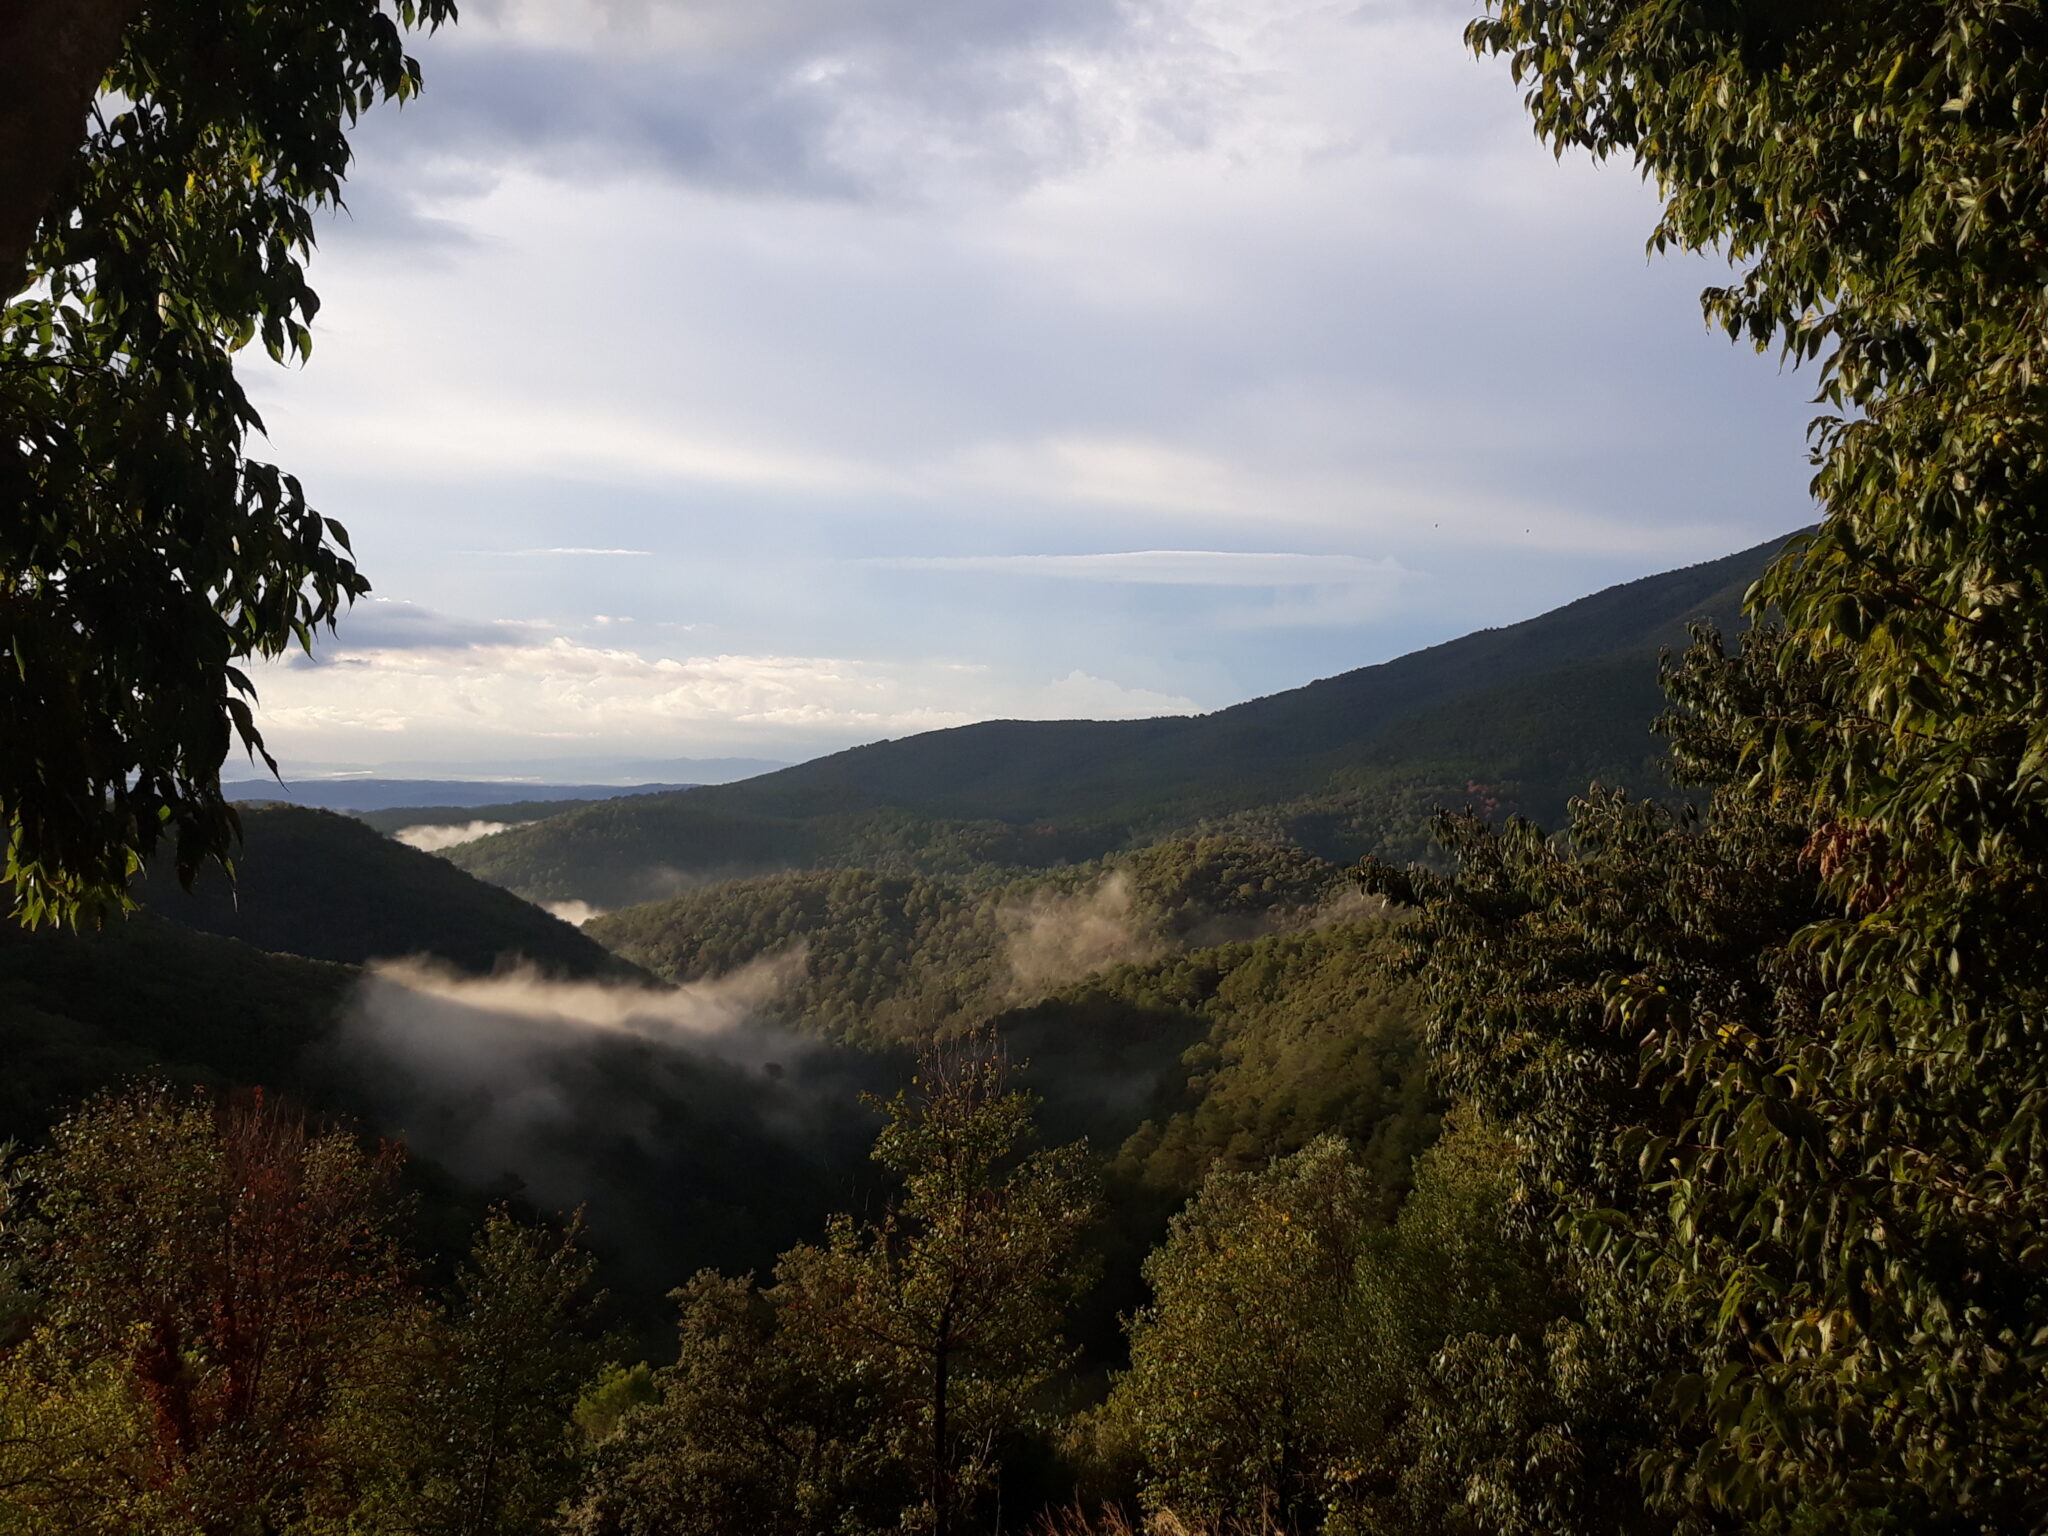 Image of a forest and valley